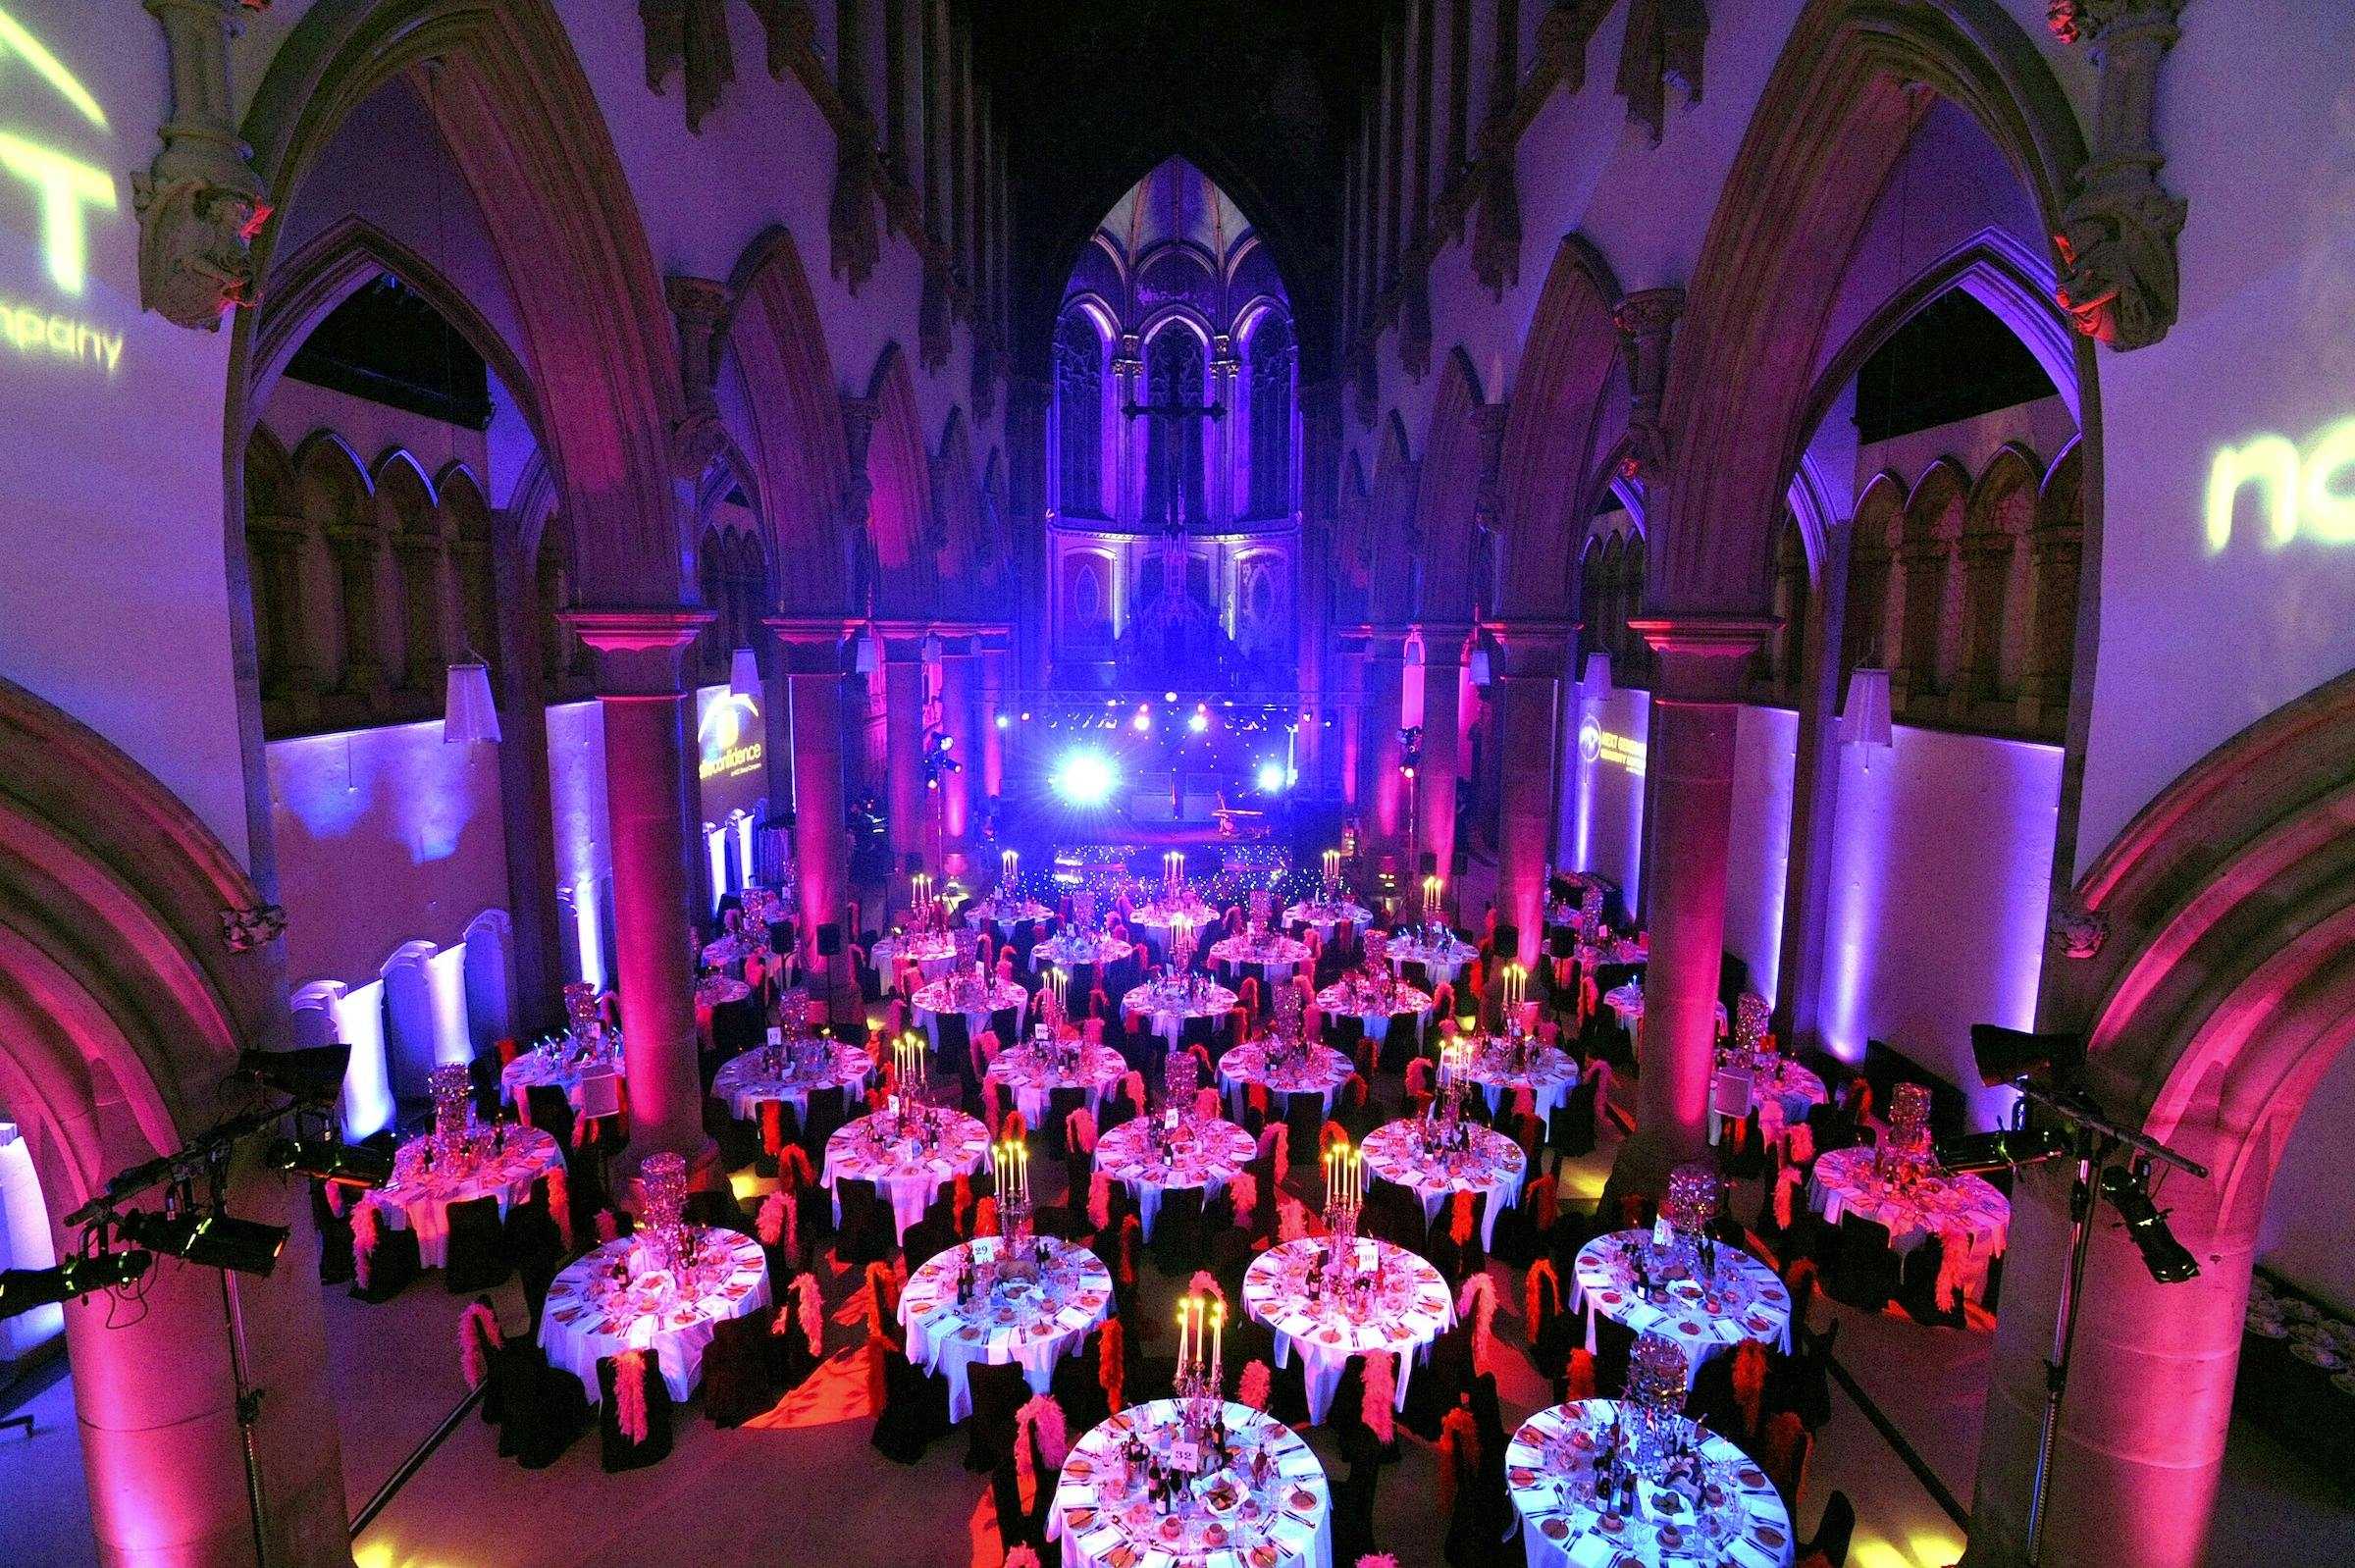 Gala Dinner Venues - The Monastery Manchester